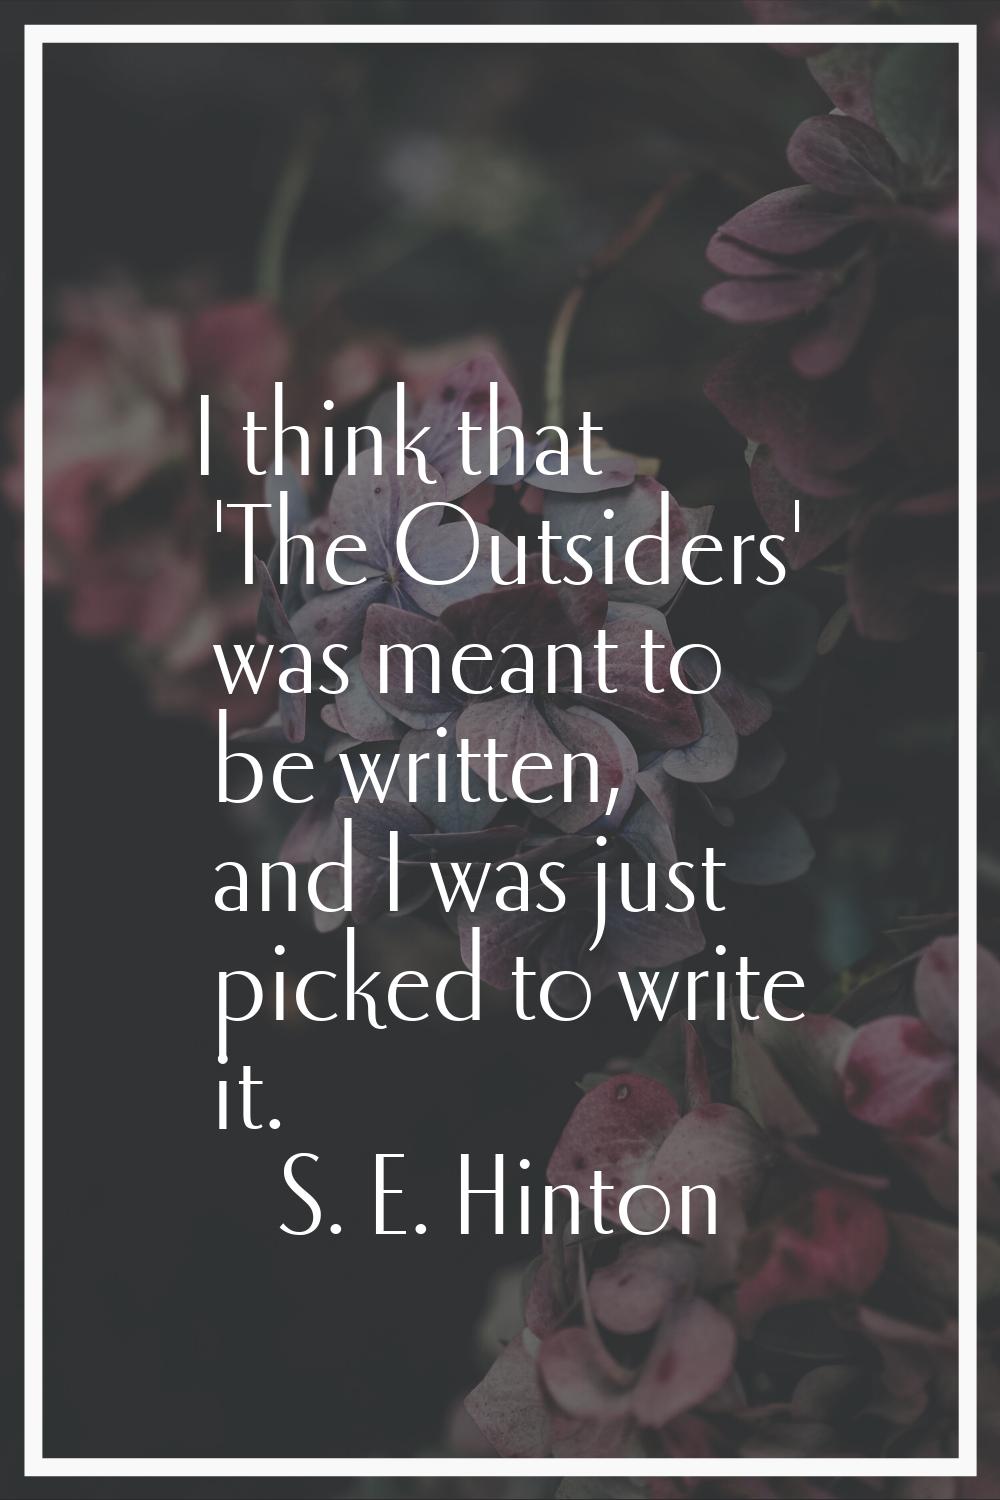 I think that 'The Outsiders' was meant to be written, and I was just picked to write it.